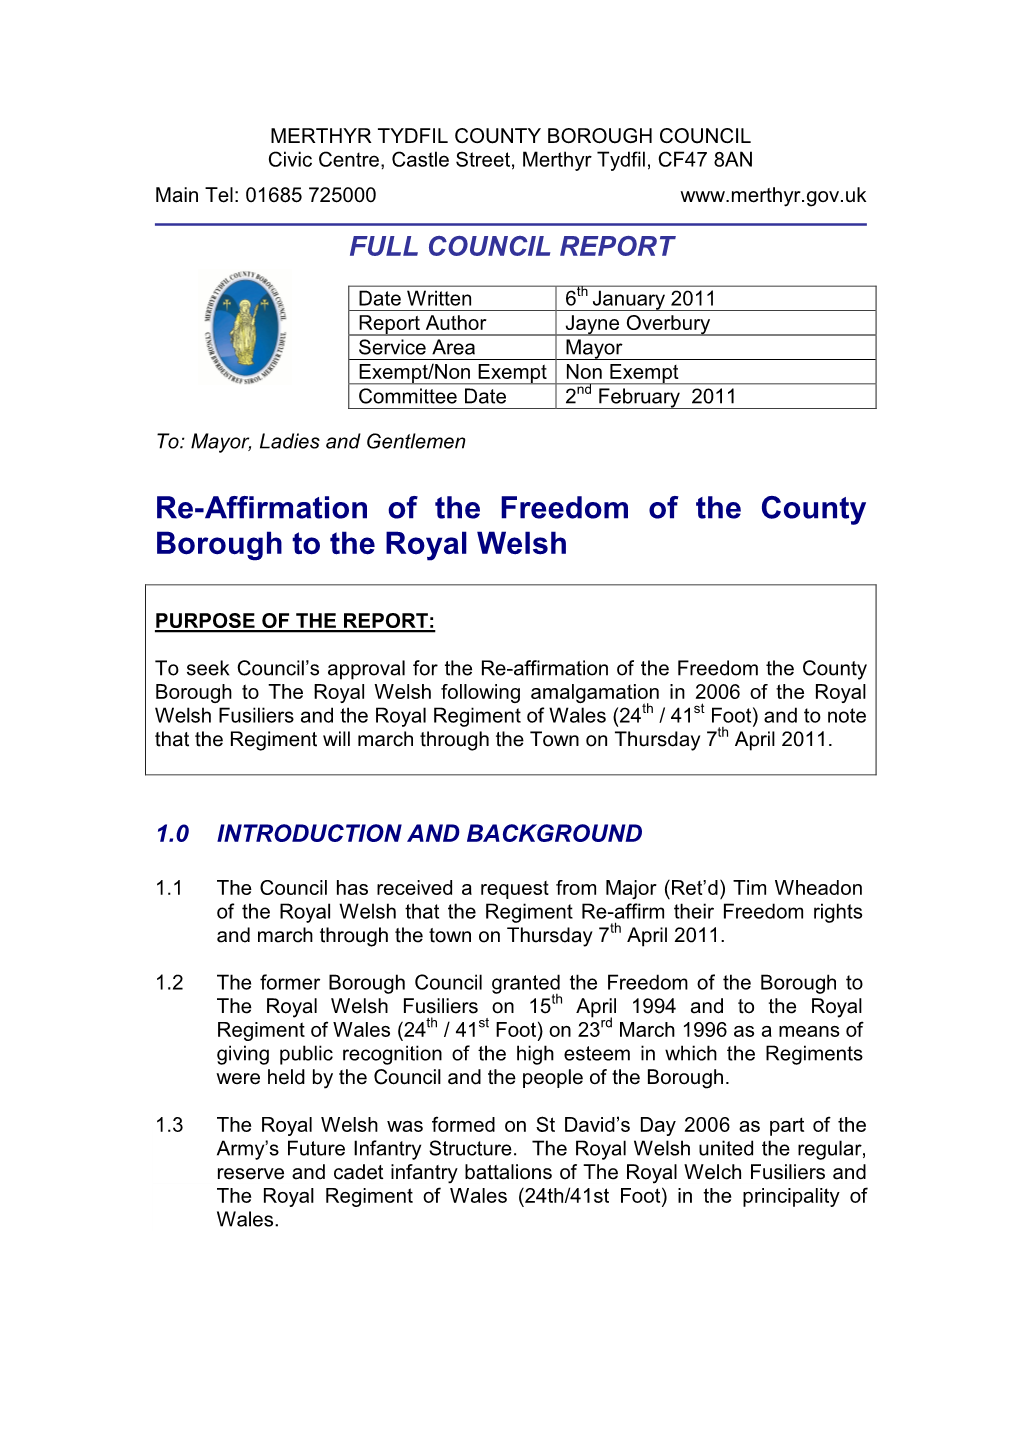 Re-Affirmation of the Freedom of the County Borough to the Royal Welsh